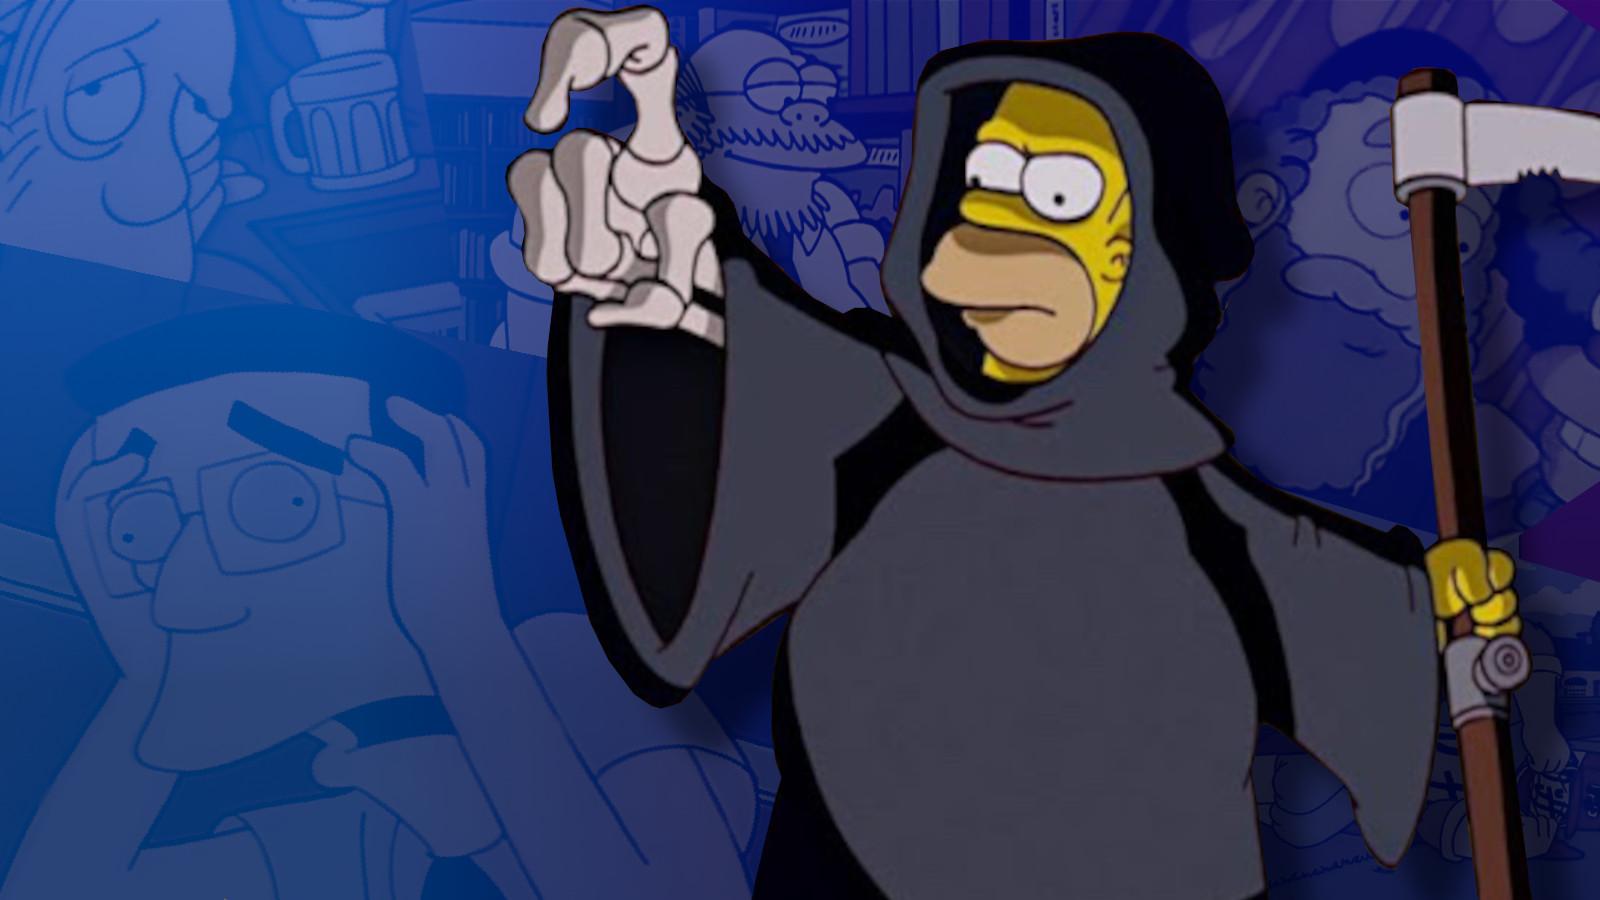 Homer Simpsons as the Grim Reaper with dead Simpsosn characetrs behind him